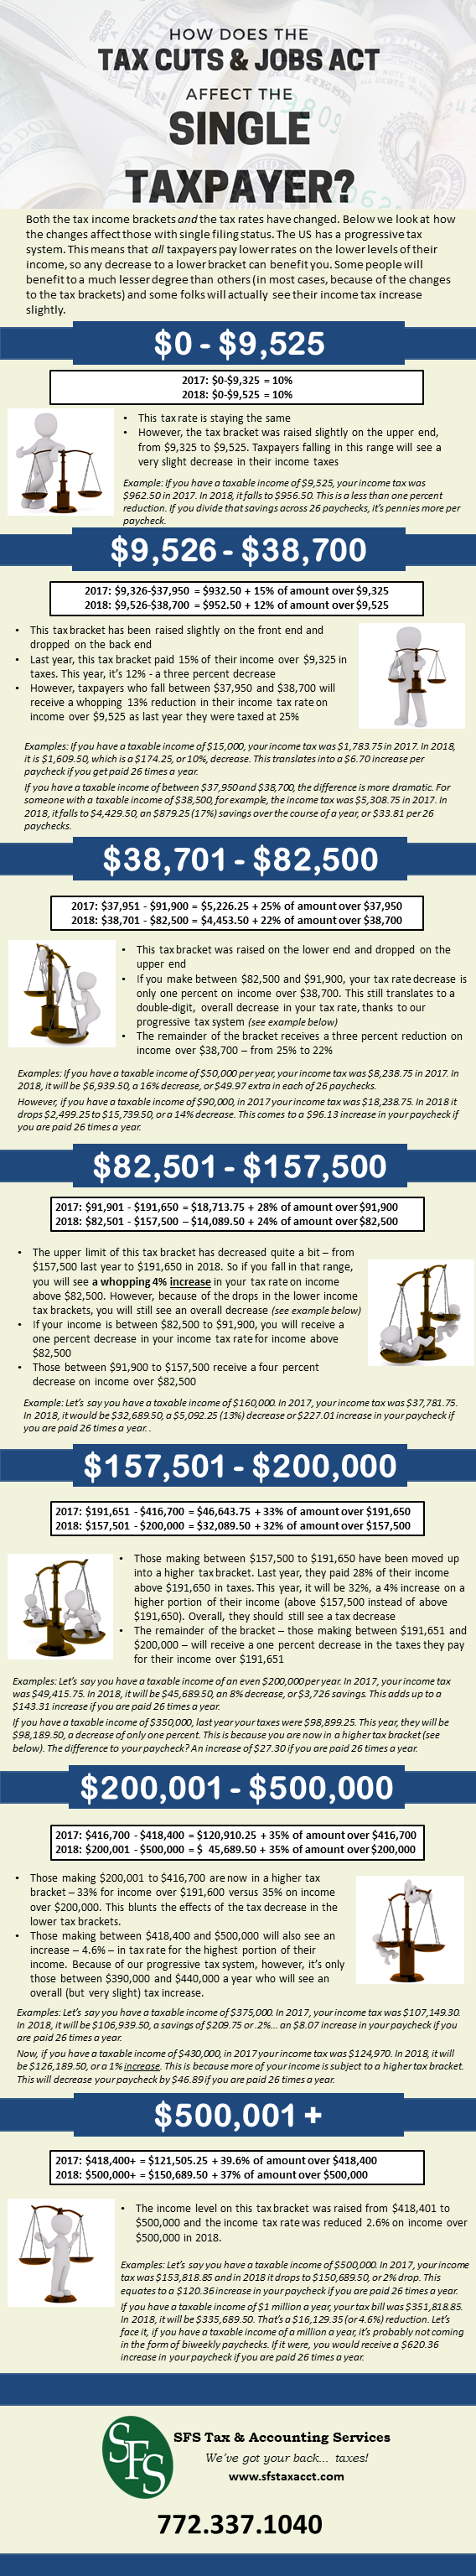 What Did the Tax Cuts and Jobs Act Do to my Income Tax, SFS Tax. SFS Tax and Accounting, Single Filer Income Tax Infographic